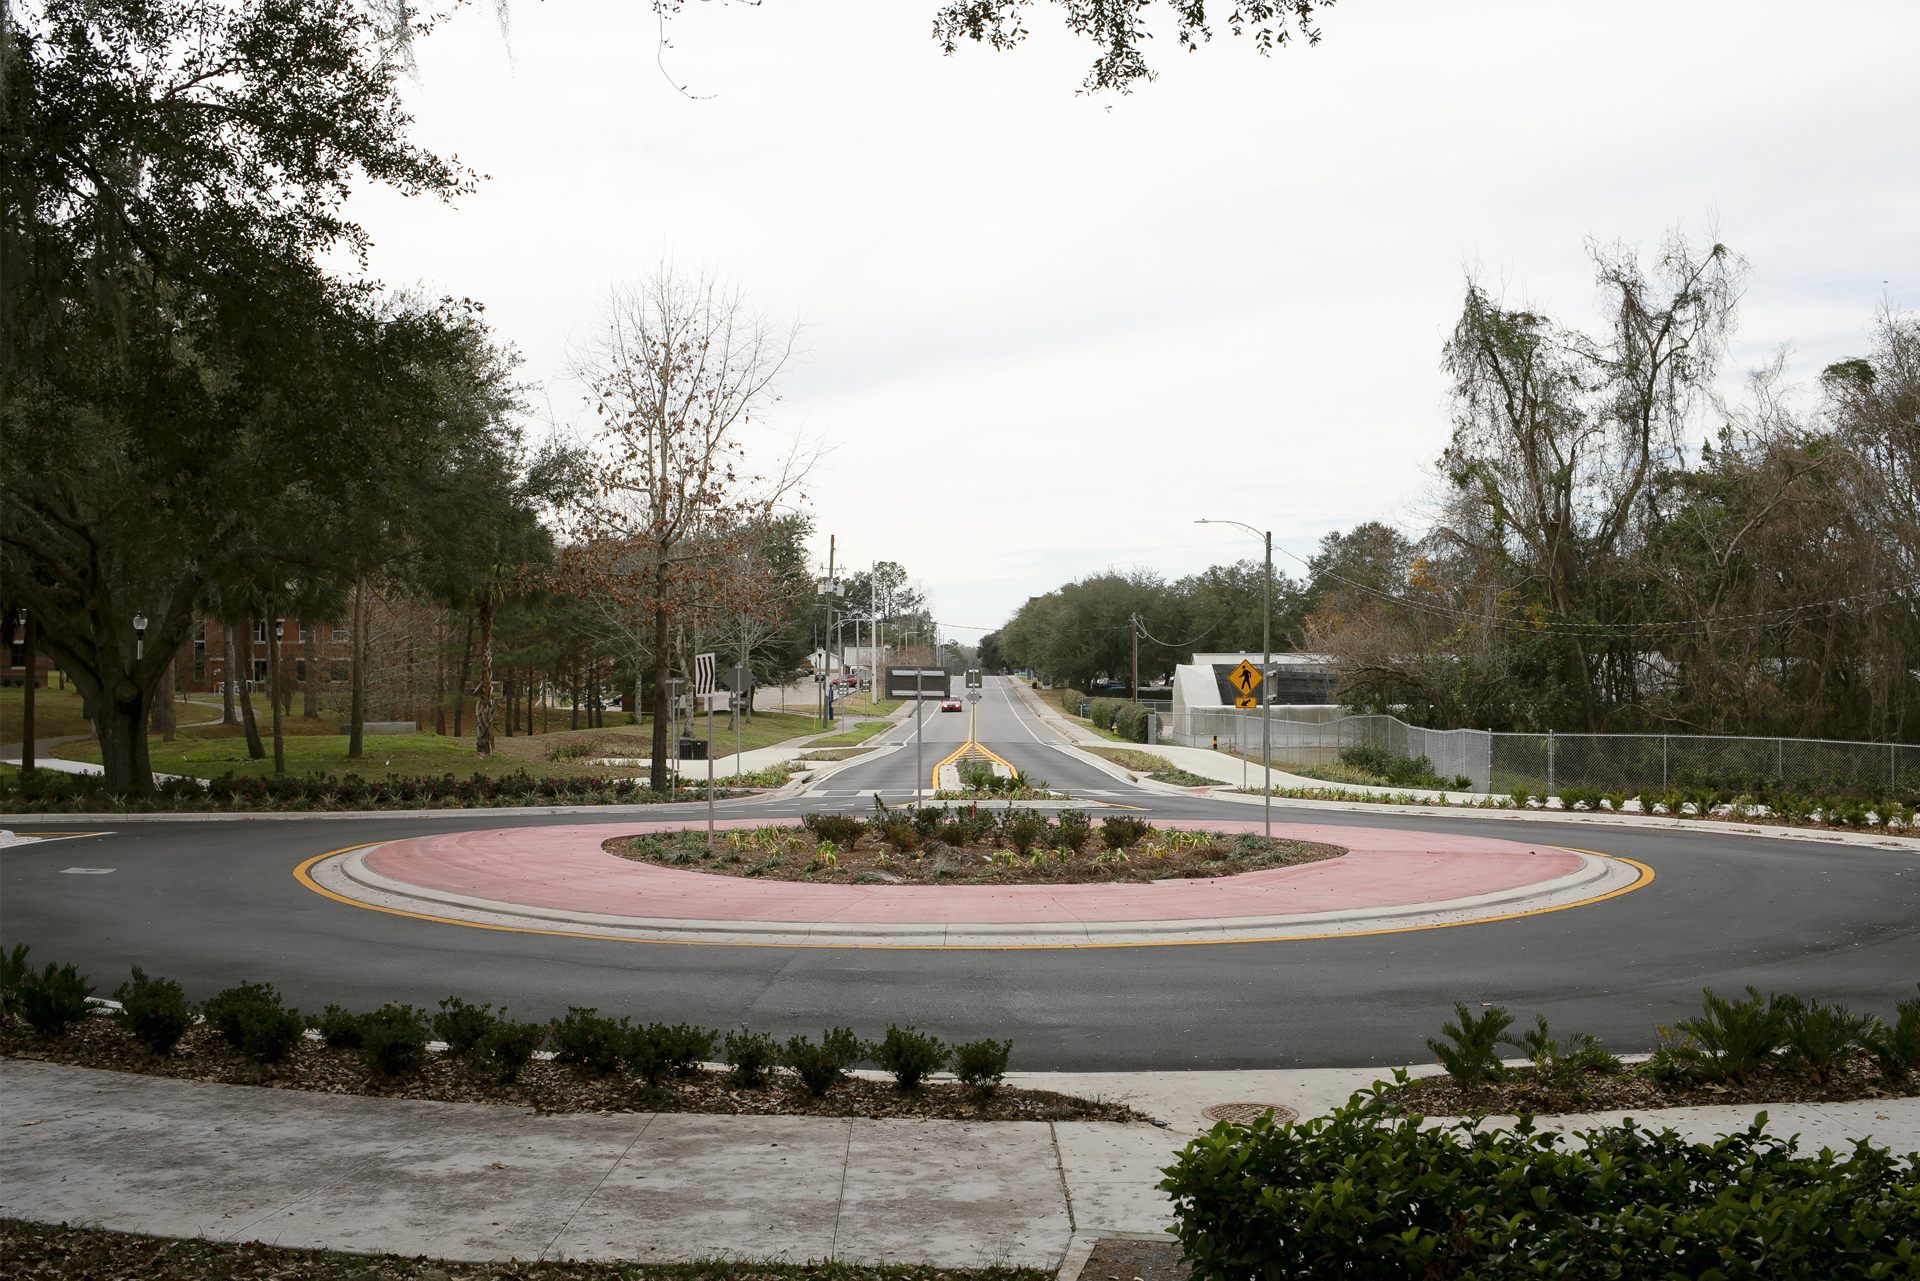 Roundabout at intersection of Radio Road and Museum Drive in Gainesville FL